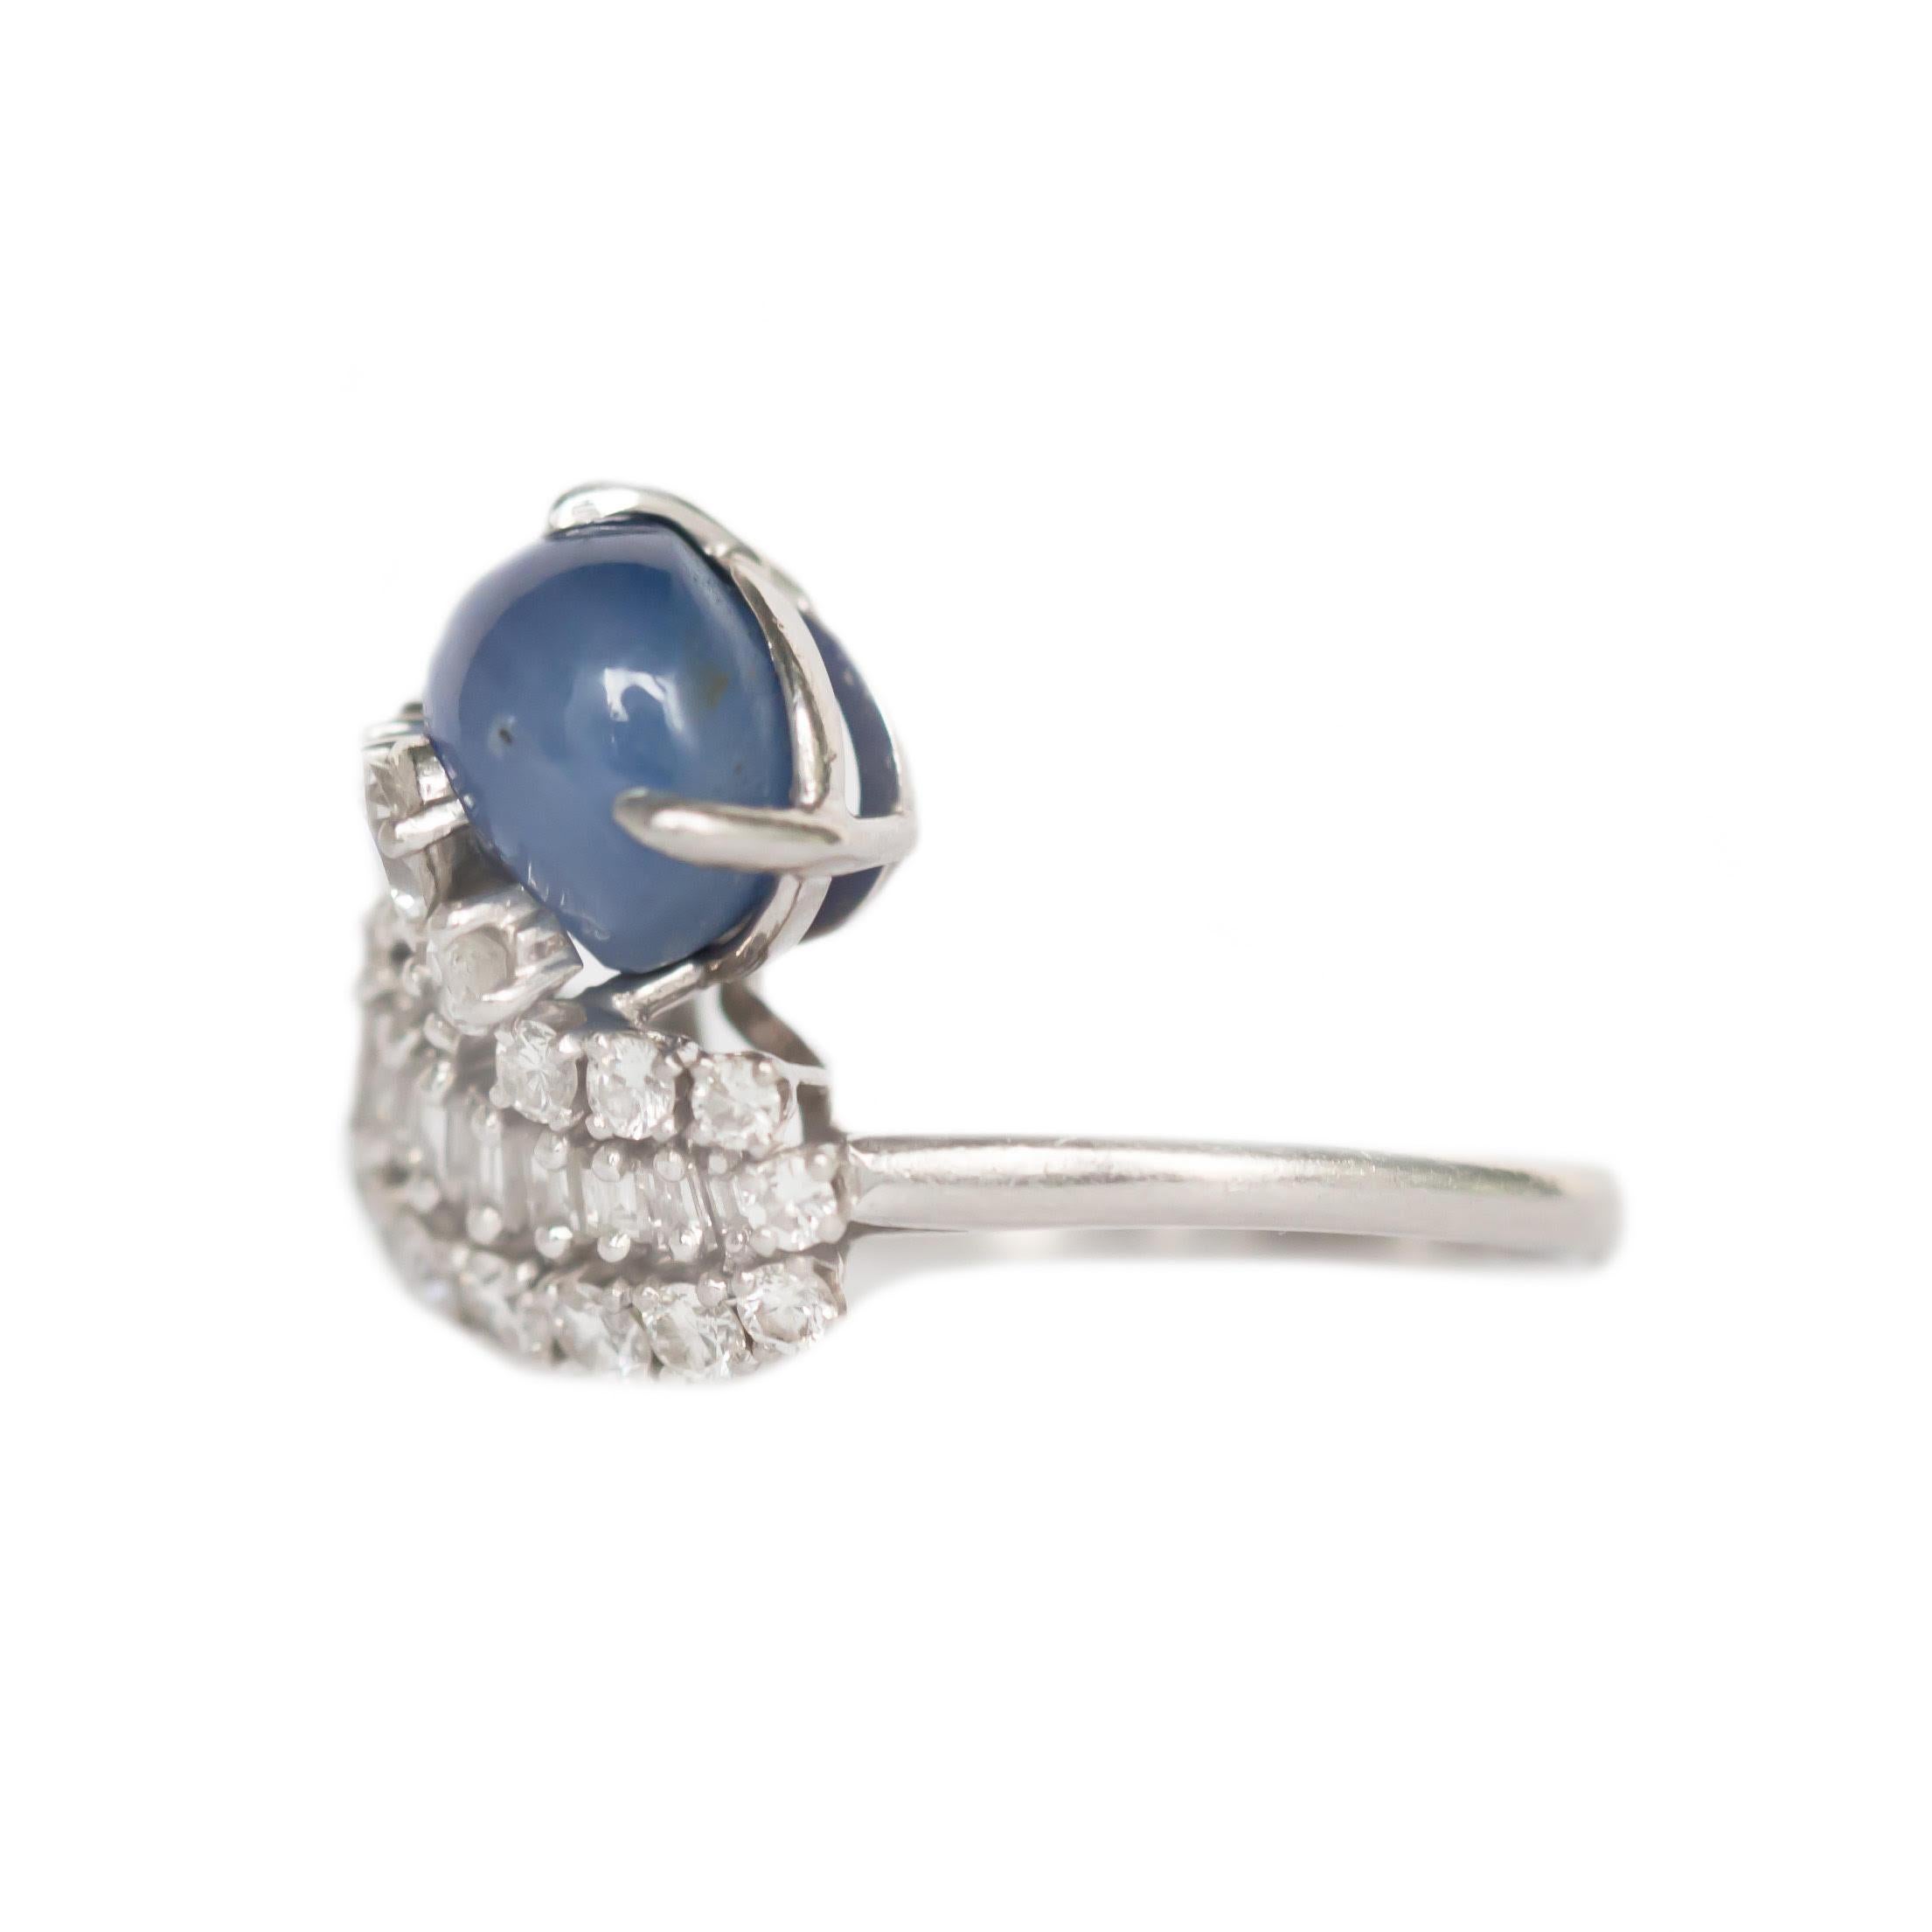 This is an exquisite example of a retro color stone ring, featuring dazzling diamonds that lead to a deep blue star sapphire!  This would make an excellent addition to any vintage lover's collection. 

This is a true antique piece, and we are